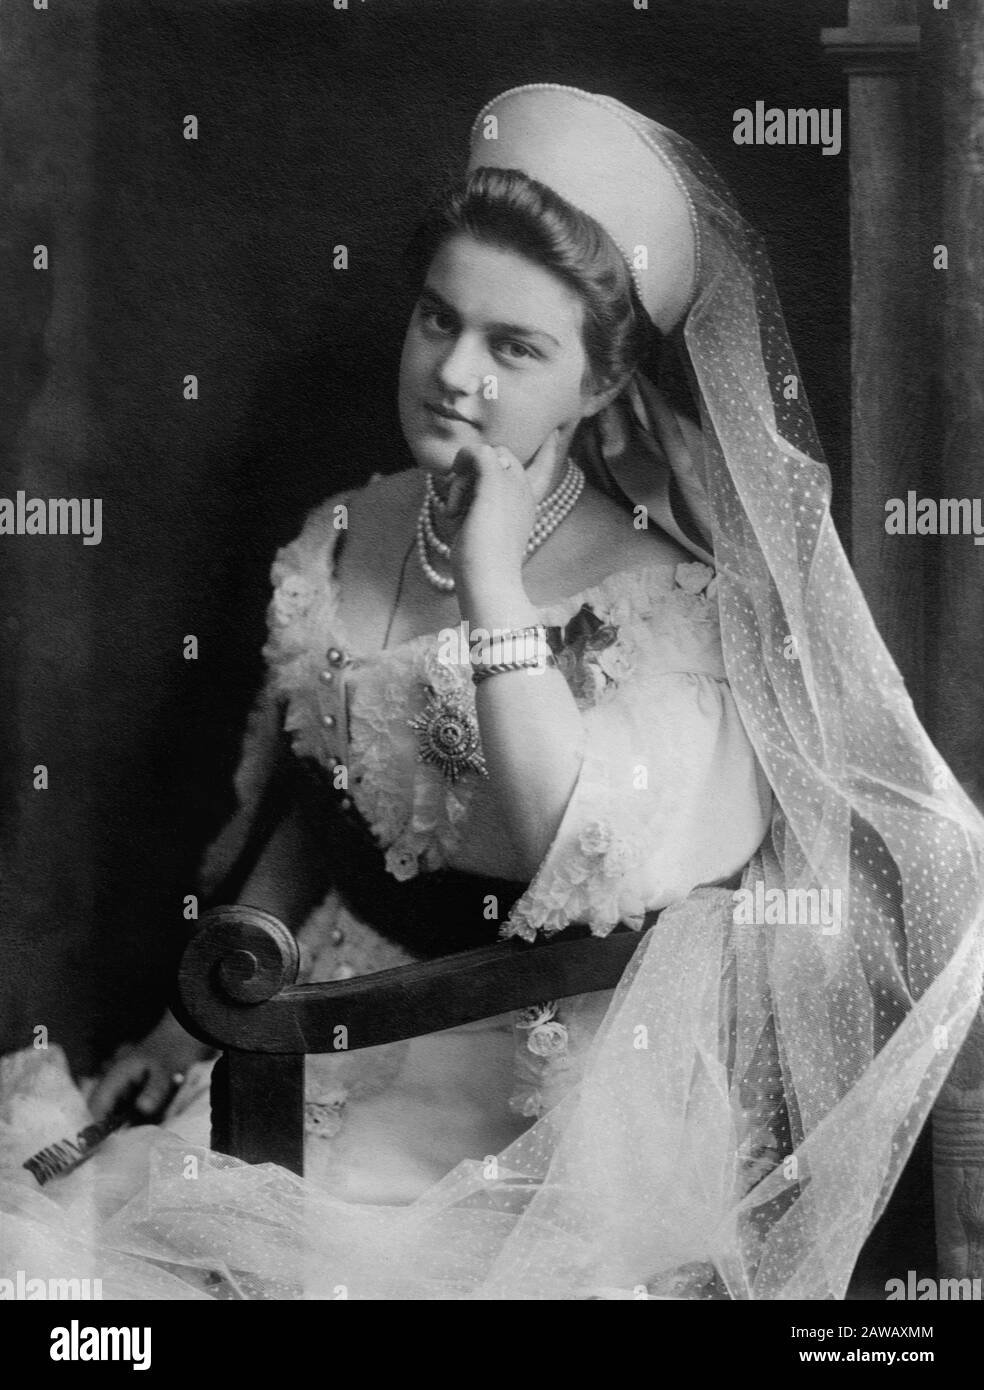 1908 ca, RUSSIA : The Grand Duchess Maria Pavlovna of Russia ( 1890 – 1958 ) wearing the traditional dress of ladies of the Russian Imperial court . Stock Photo